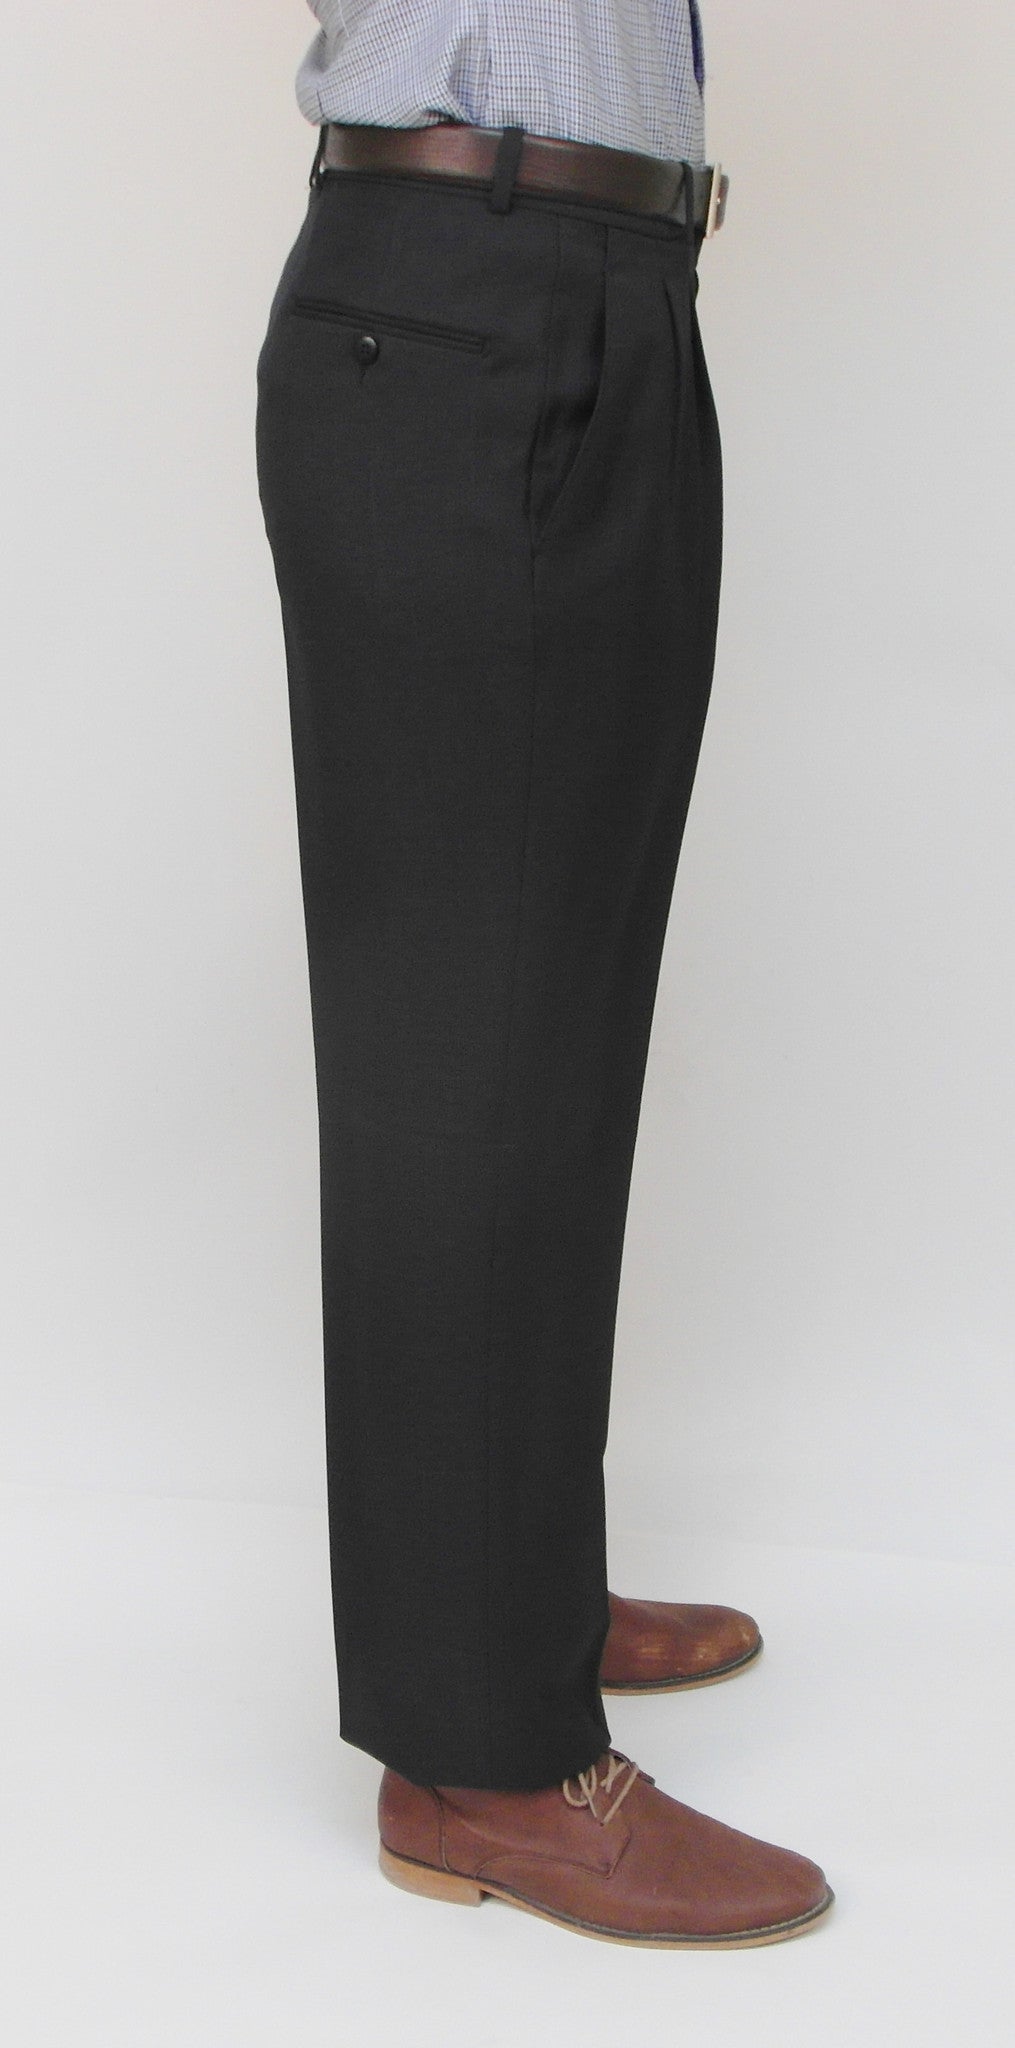 Pleated Dress Pants for Women